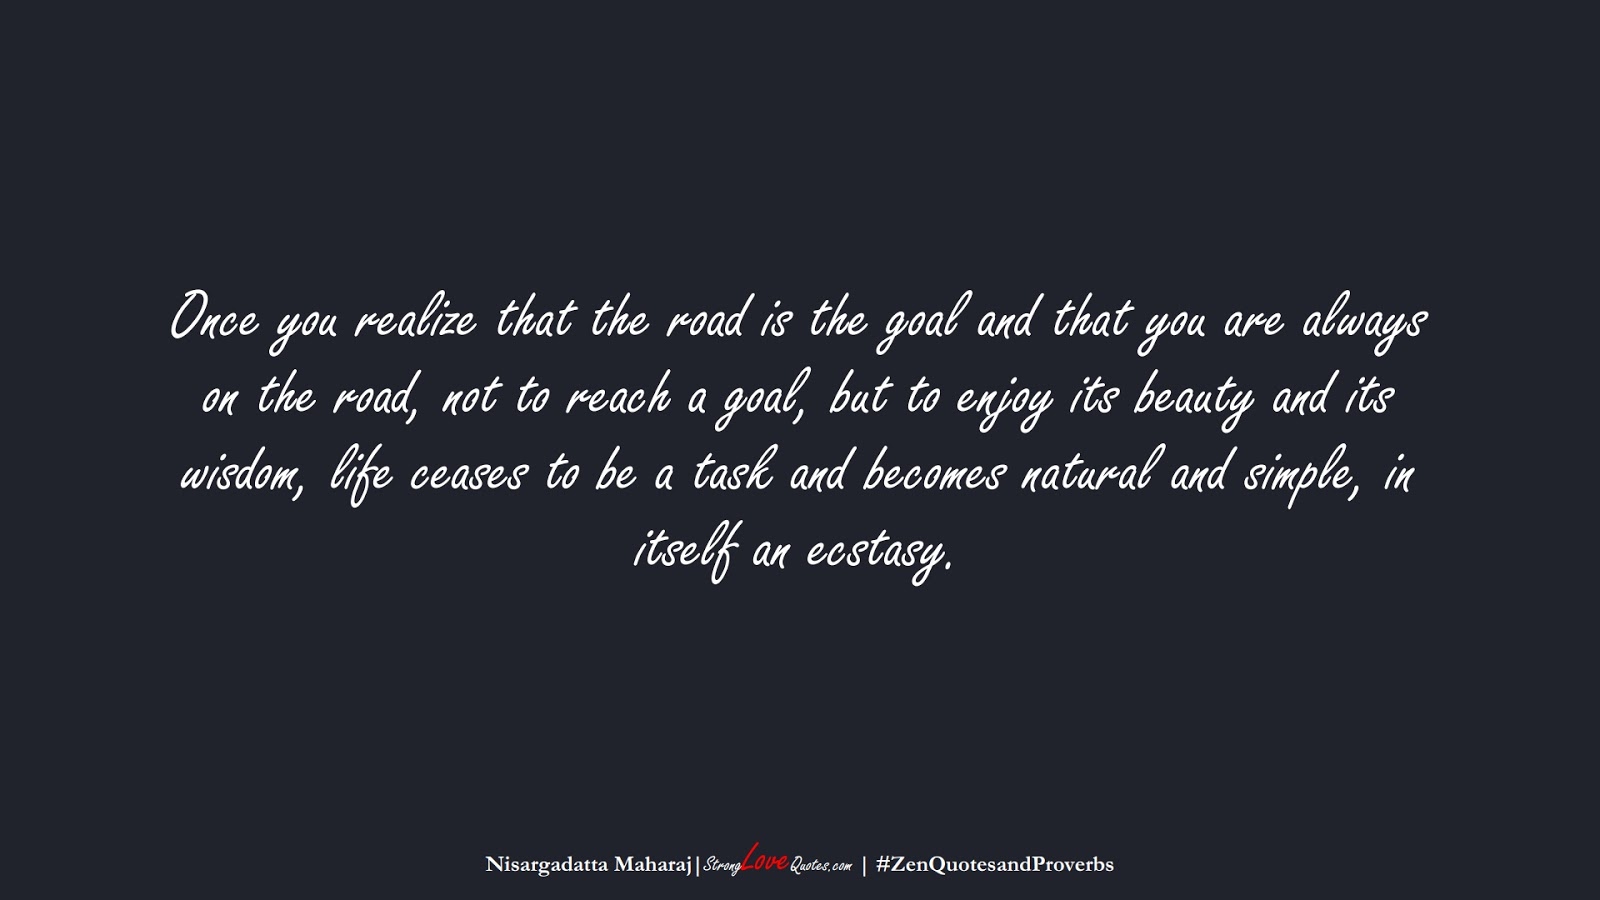 Once you realize that the road is the goal and that you are always on the road, not to reach a goal, but to enjoy its beauty and its wisdom, life ceases to be a task and becomes natural and simple, in itself an ecstasy. (Nisargadatta Maharaj);  #ZenQuotesandProverbs